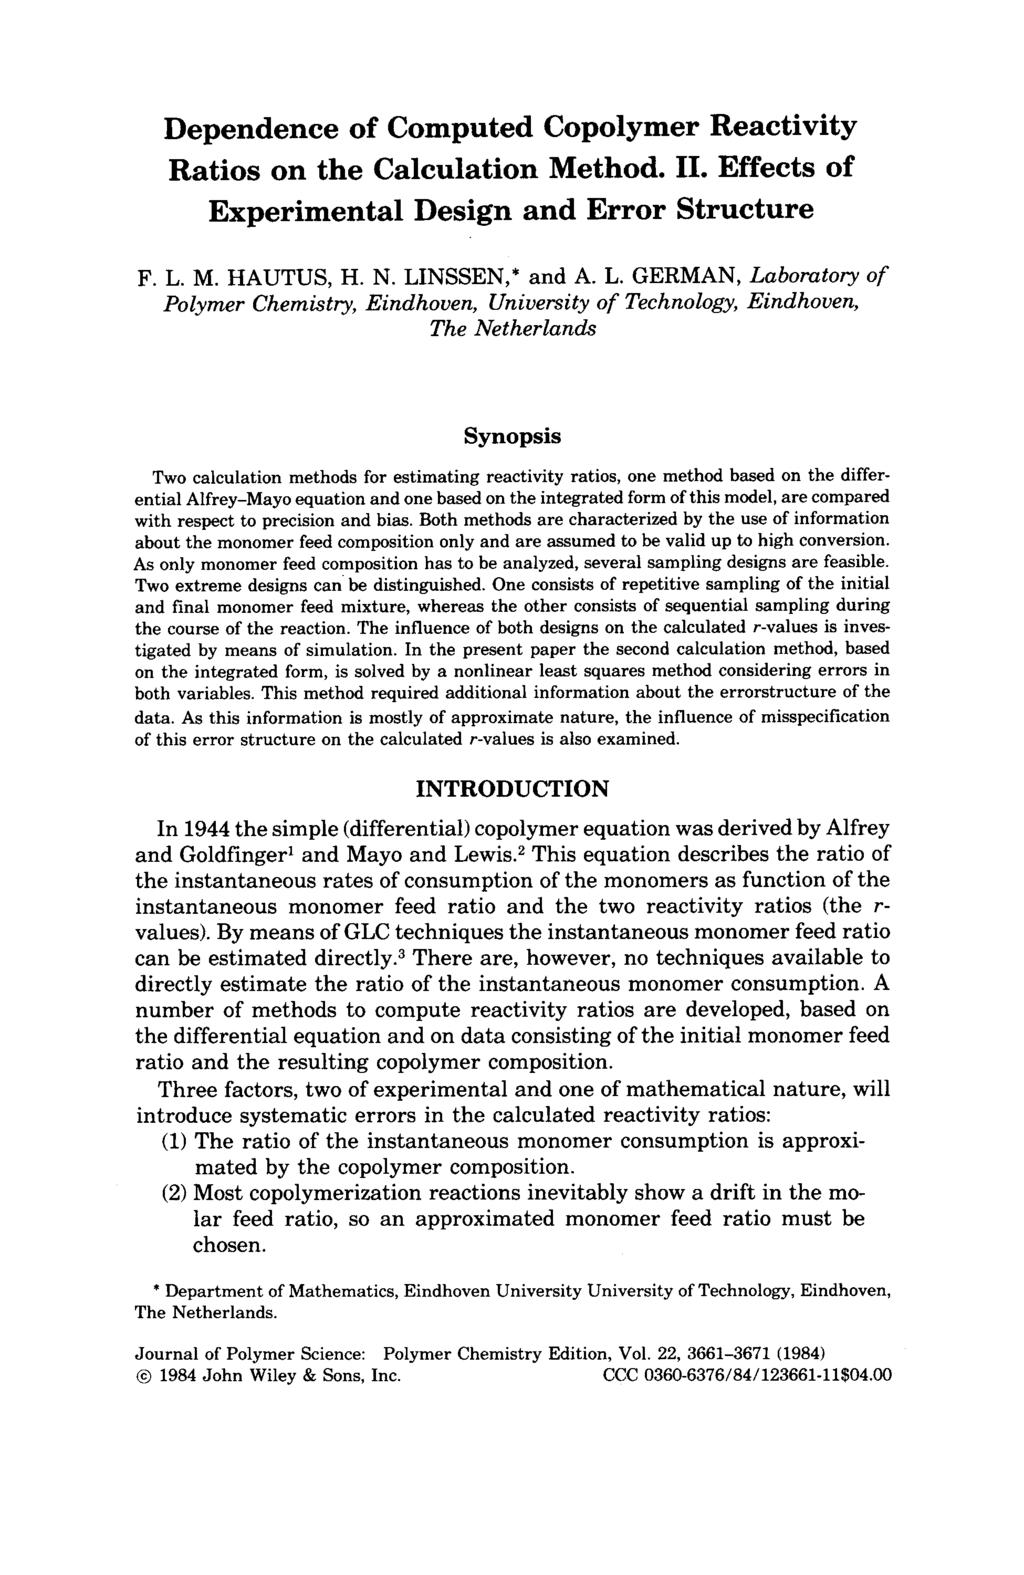 Dependence of Computed Copolymer Reactivity Ratios on the Calculation Method. 11. Effects of Experimental Design and Error Structure F. L.